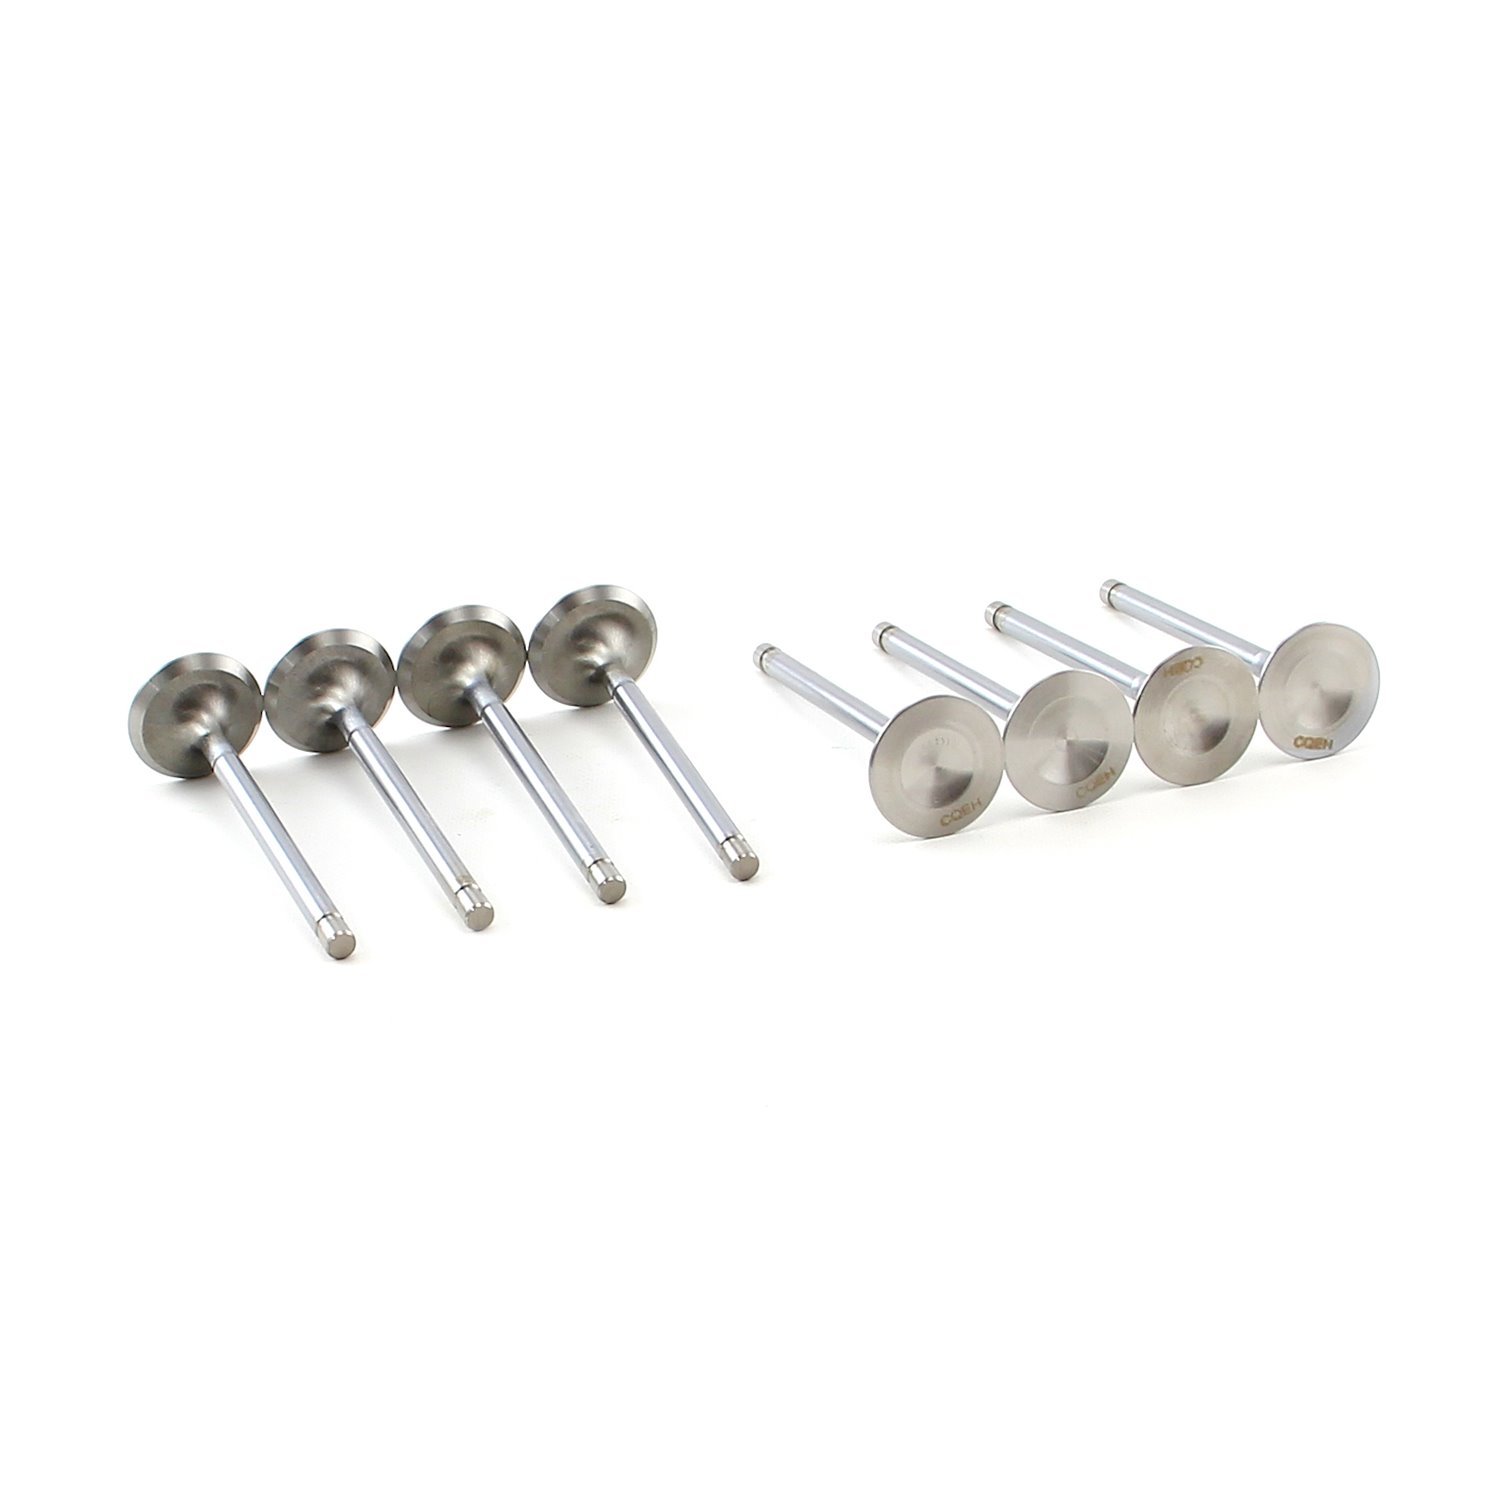 Stainless Steel Exhaust Valves Small Block Chevy 350, 1.600 in. +200, 11/32 in. Stem Diameter